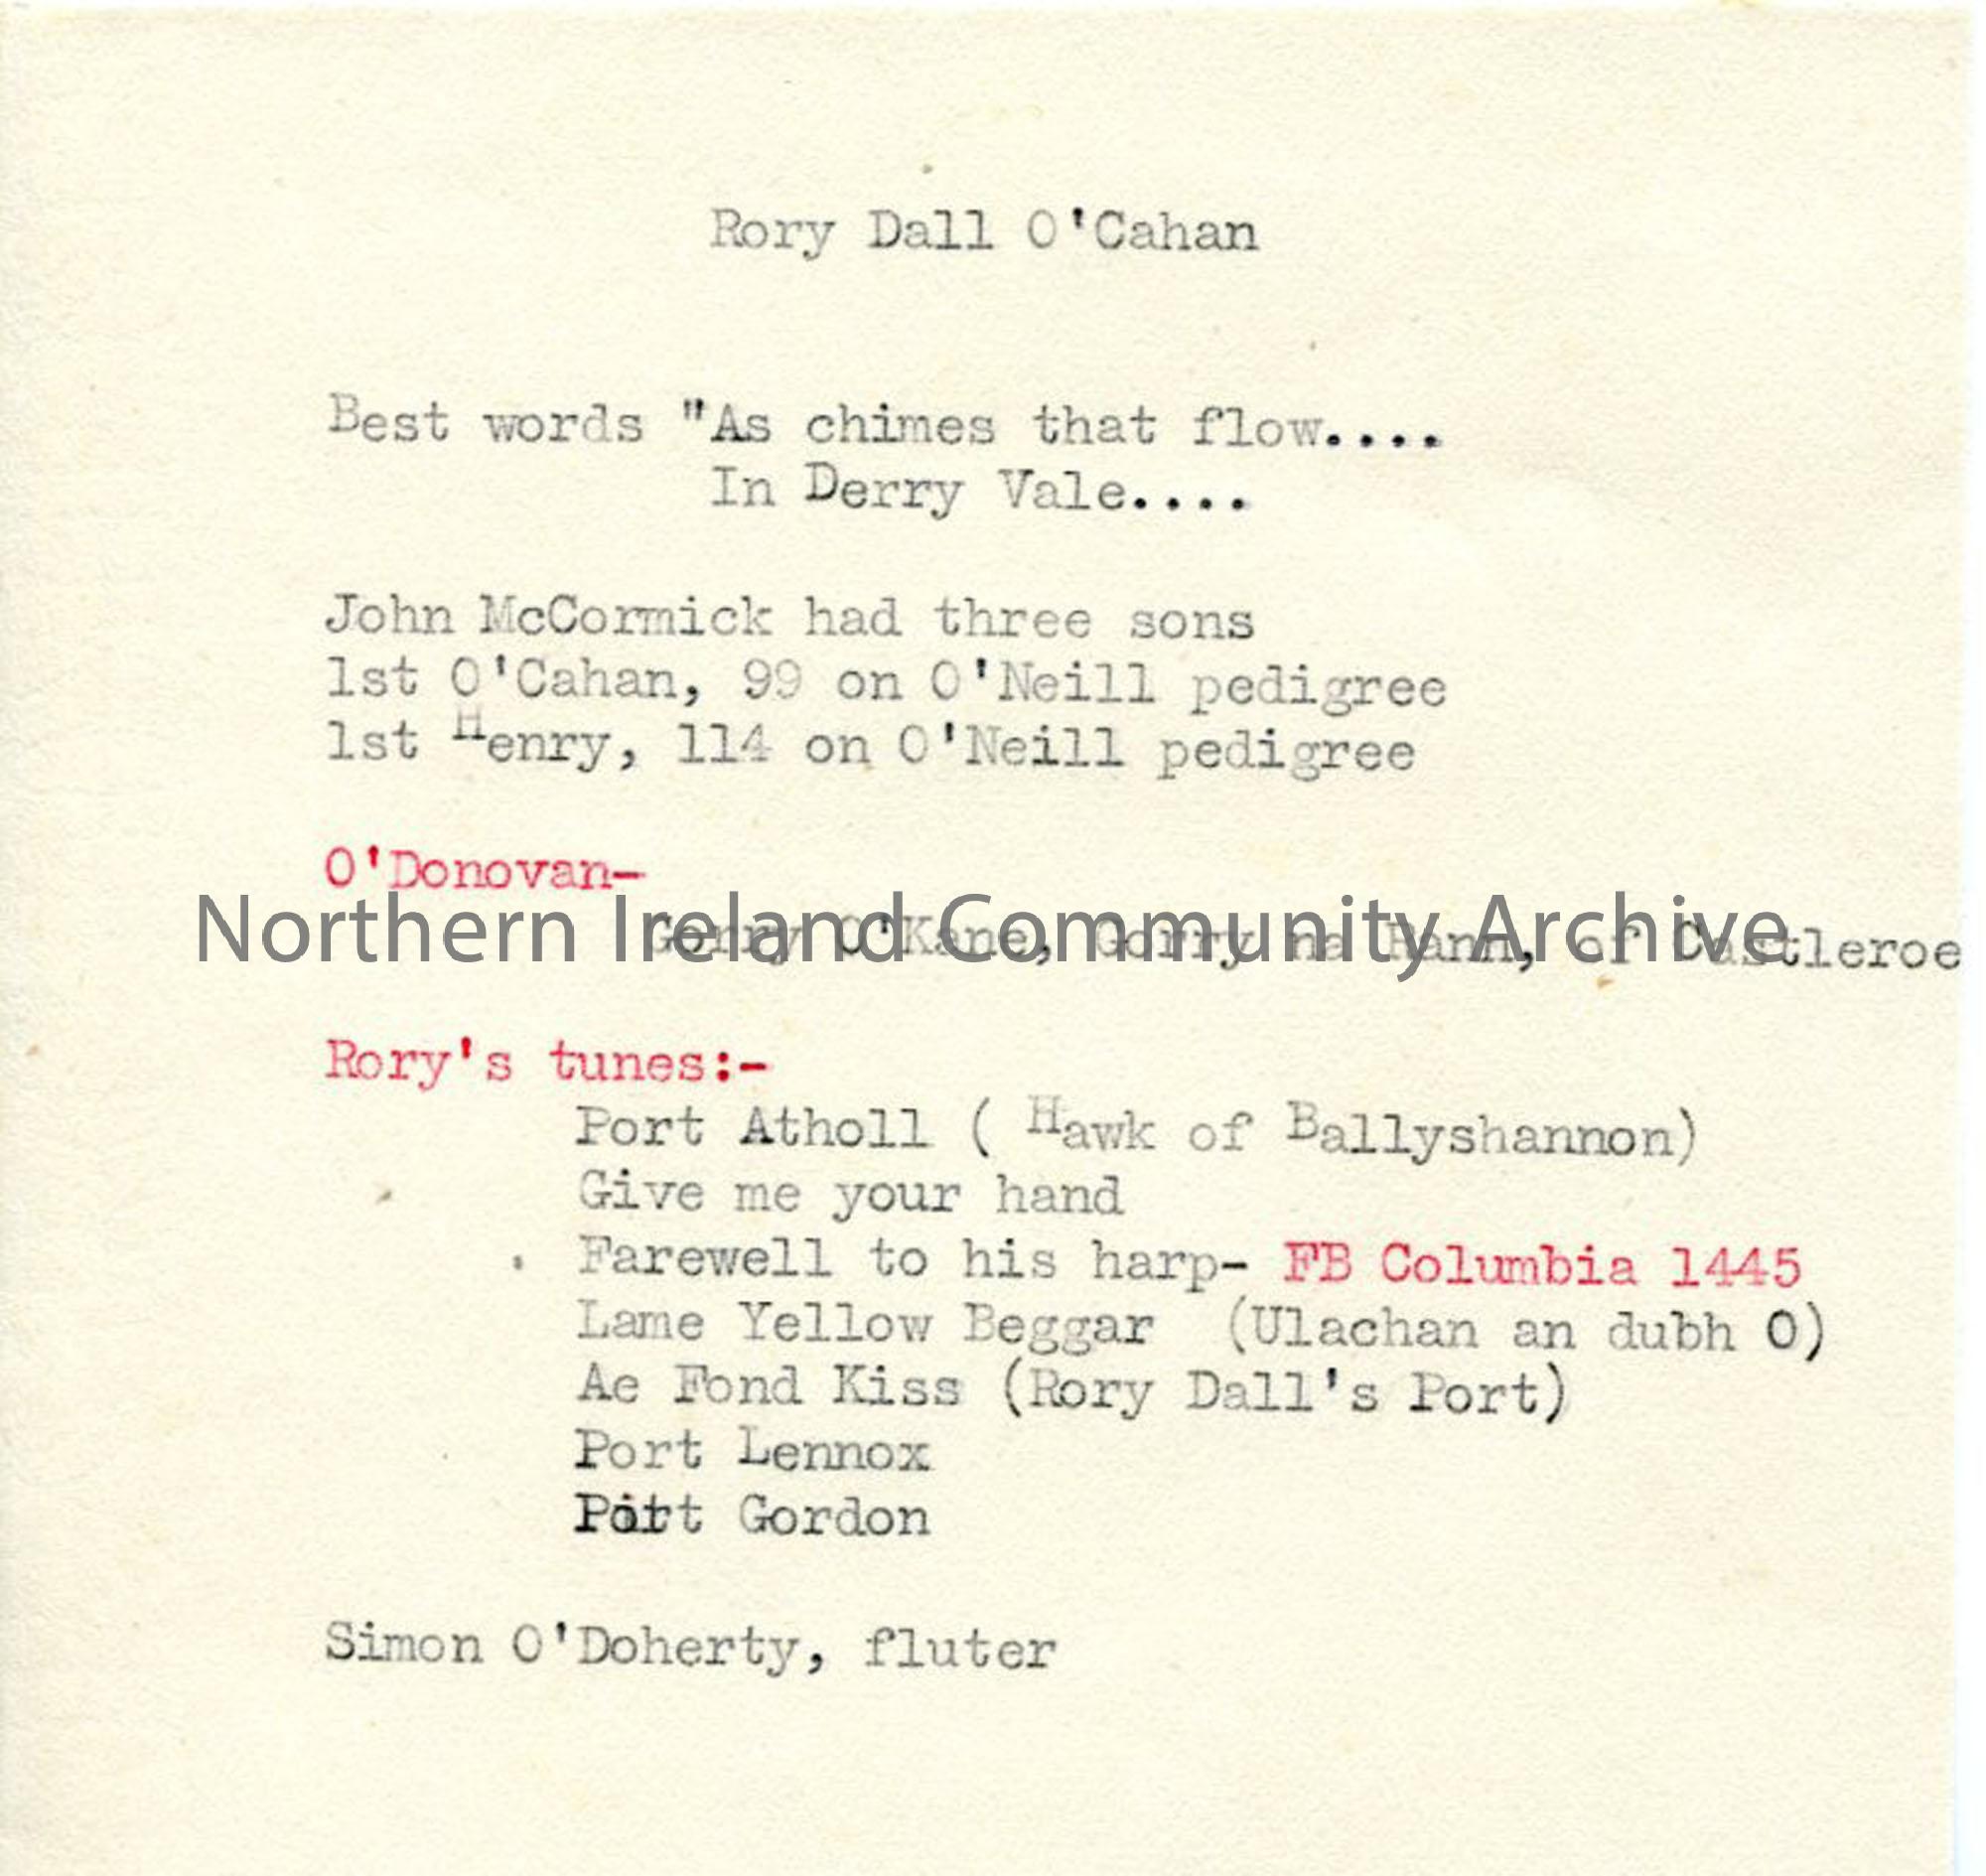 Typed notes re: Rory Dall O’Cahan – lineage and ‘Rory’s tunes’